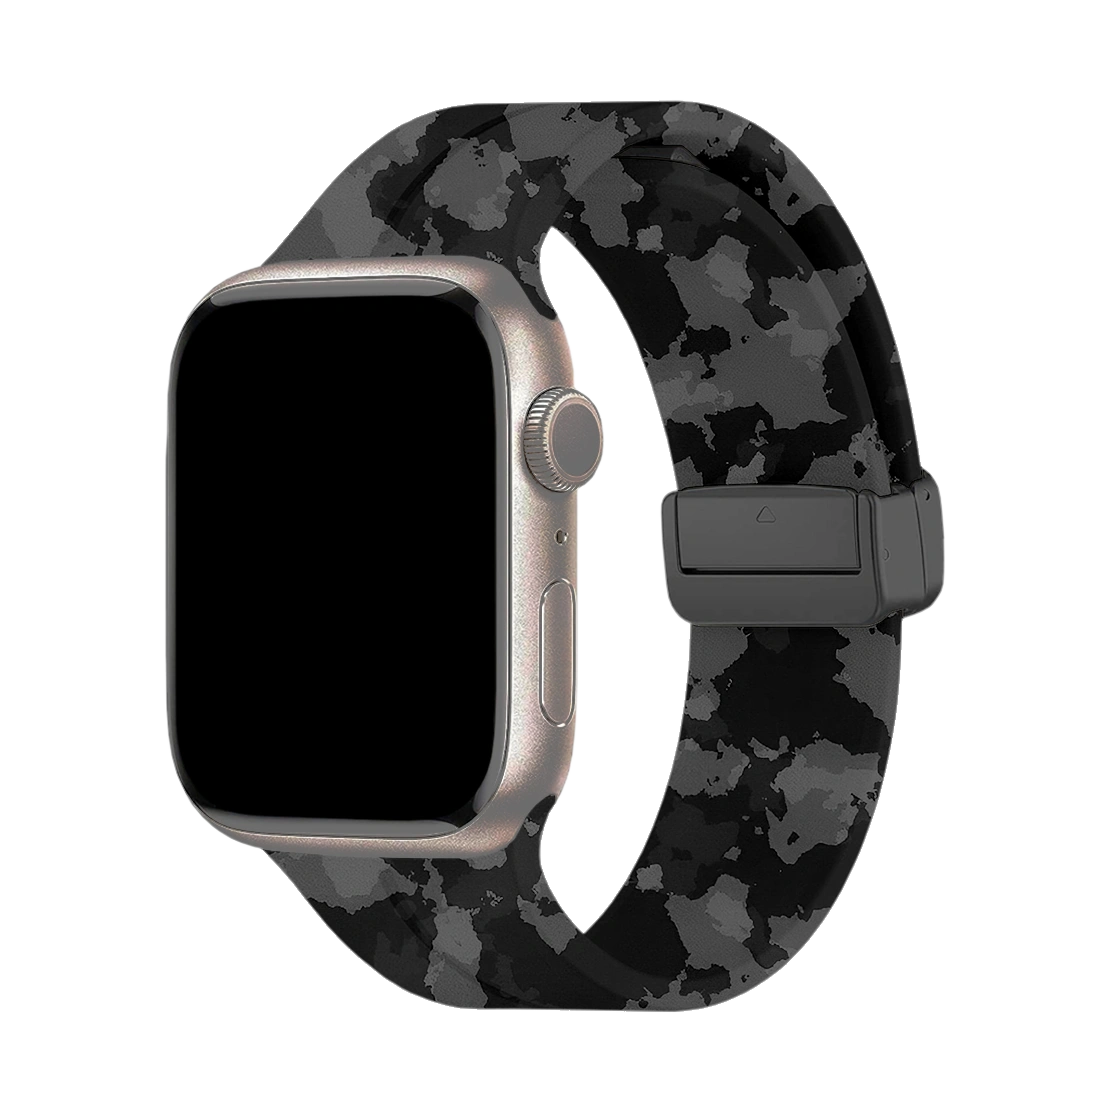 Unipha Apple Watch Silicone Band Magnetic D-Buckle Strap Army Stylish Creative